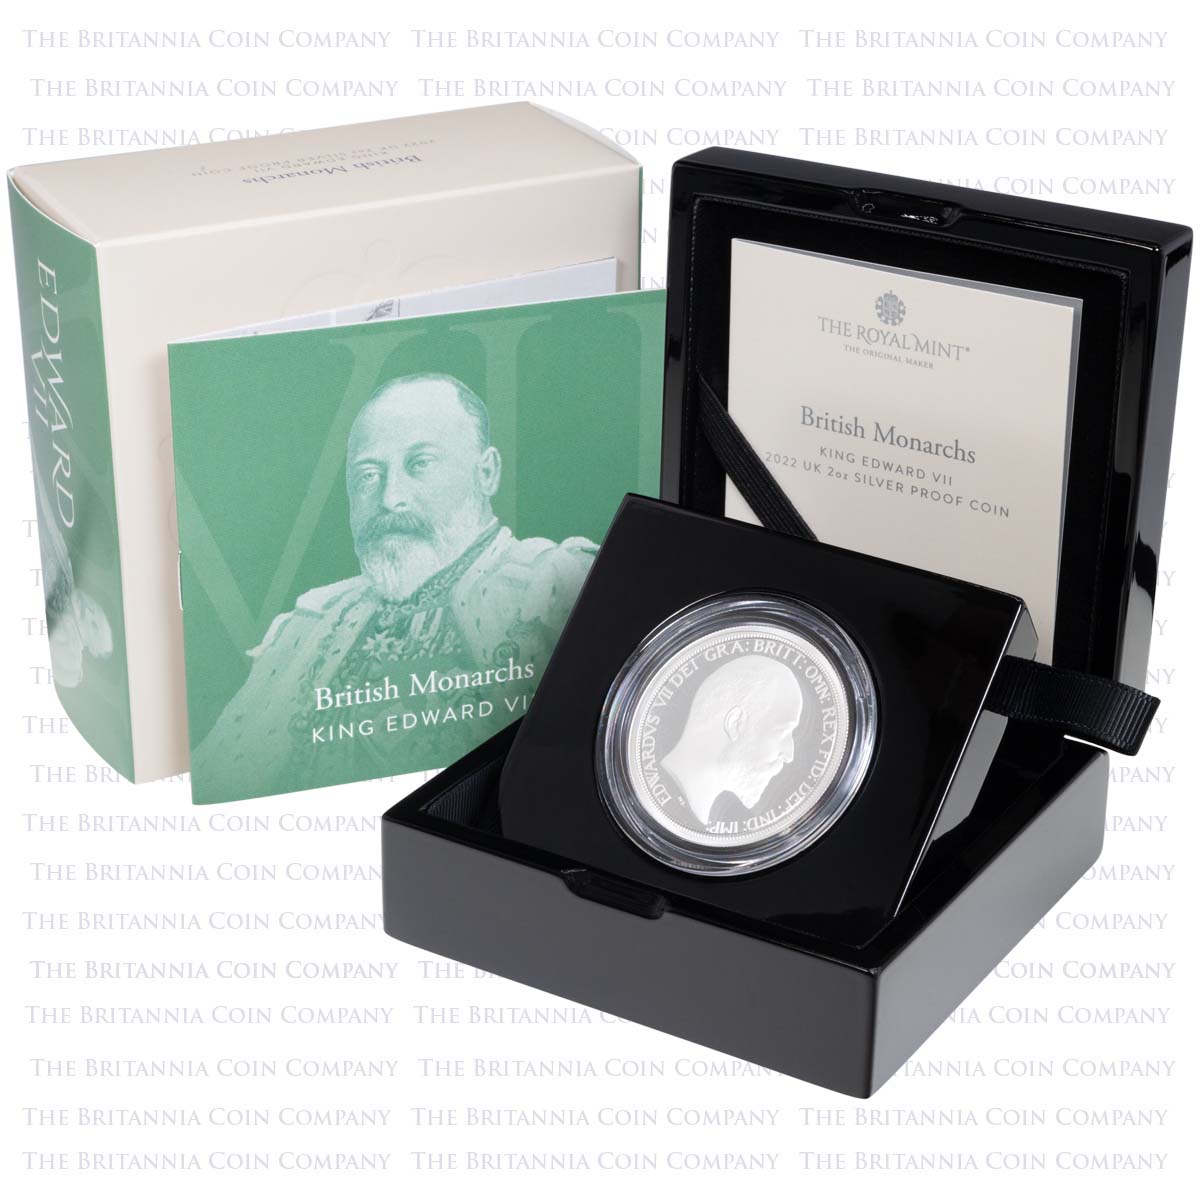 UK22E7S2O 2022 British Monarchs King Edward VII Two Ounce Silver Proof Coin Boxed